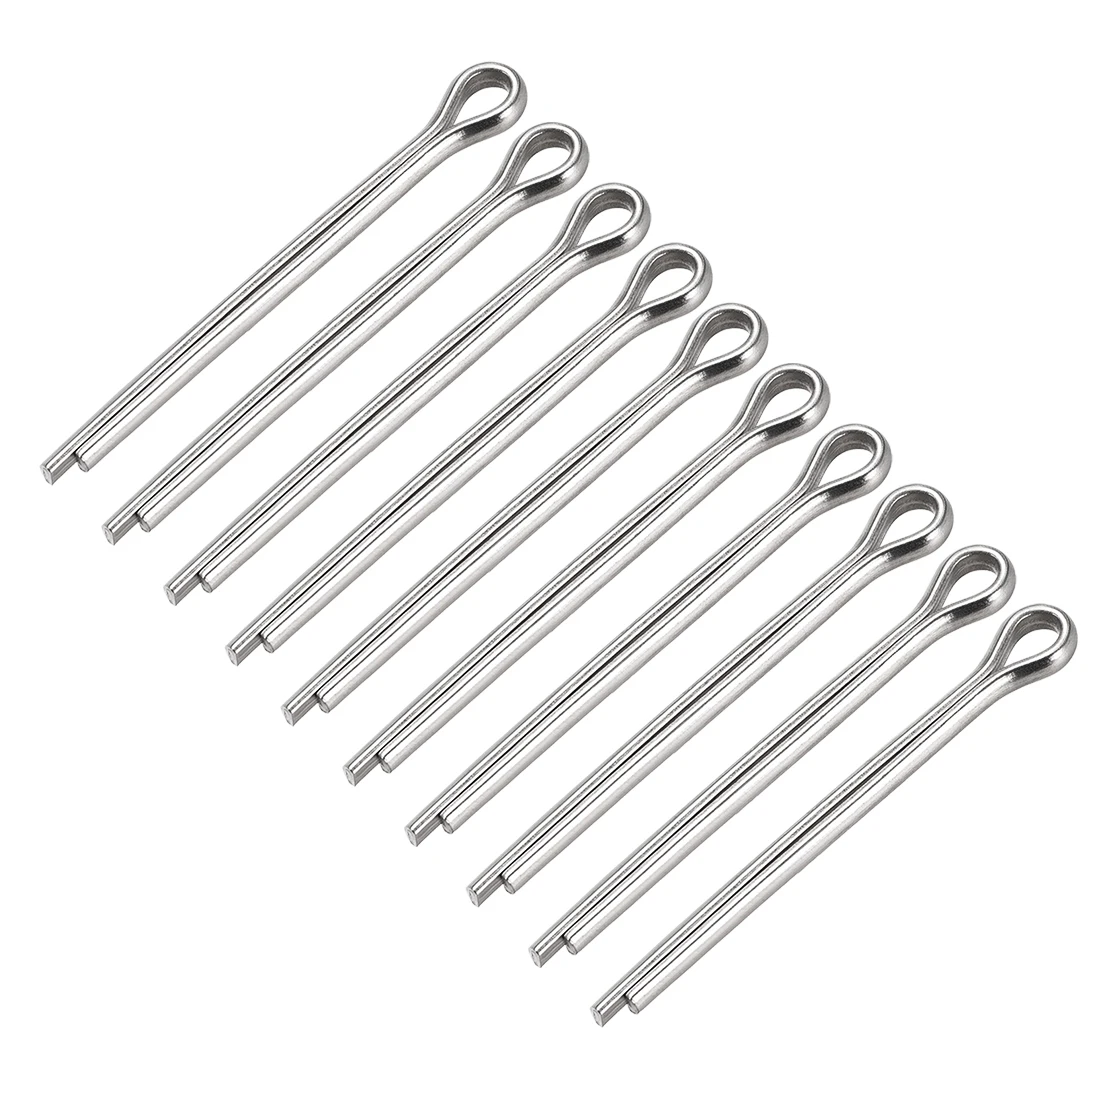 Details about   Split Cotter Pin 5/32 inch x 3 5/32 inch Carbon Steel 2-Prongs Silver 50Pcs 